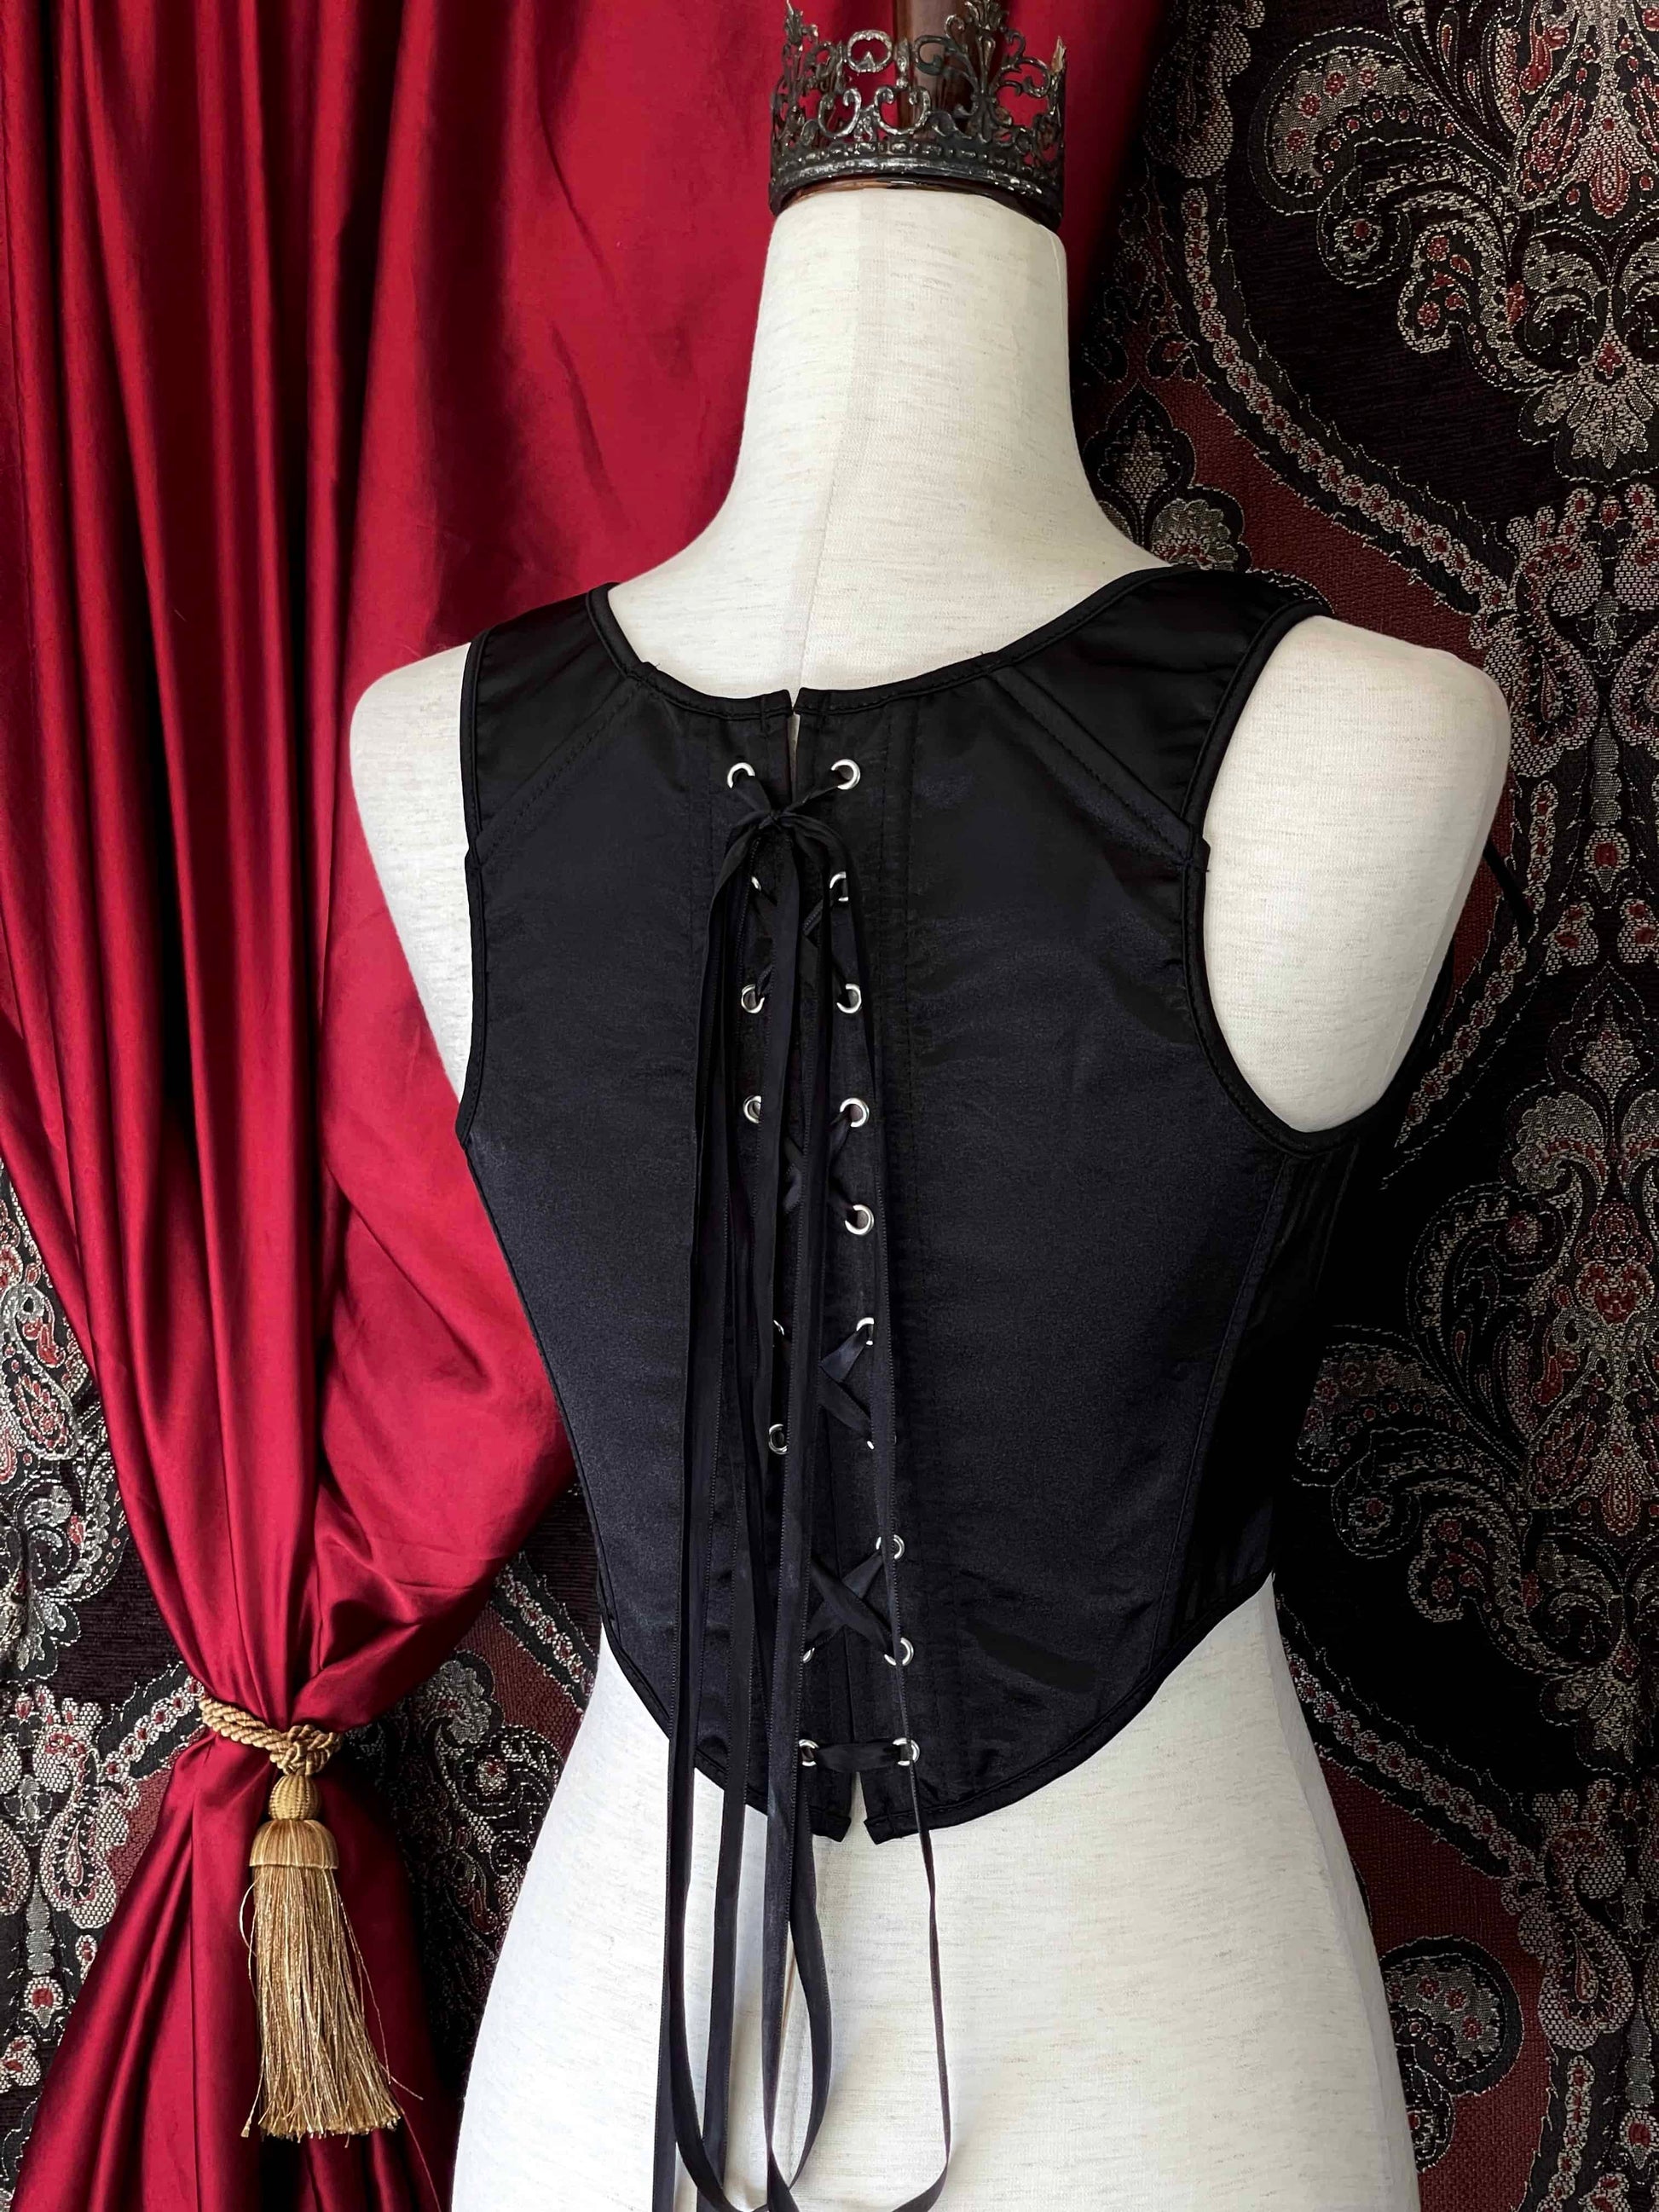 A Gothic Black Satin Renaissance Tudor Era Corset or Pair of stays is pictured on a mannequin in front of a historical Ornate Backdrop.